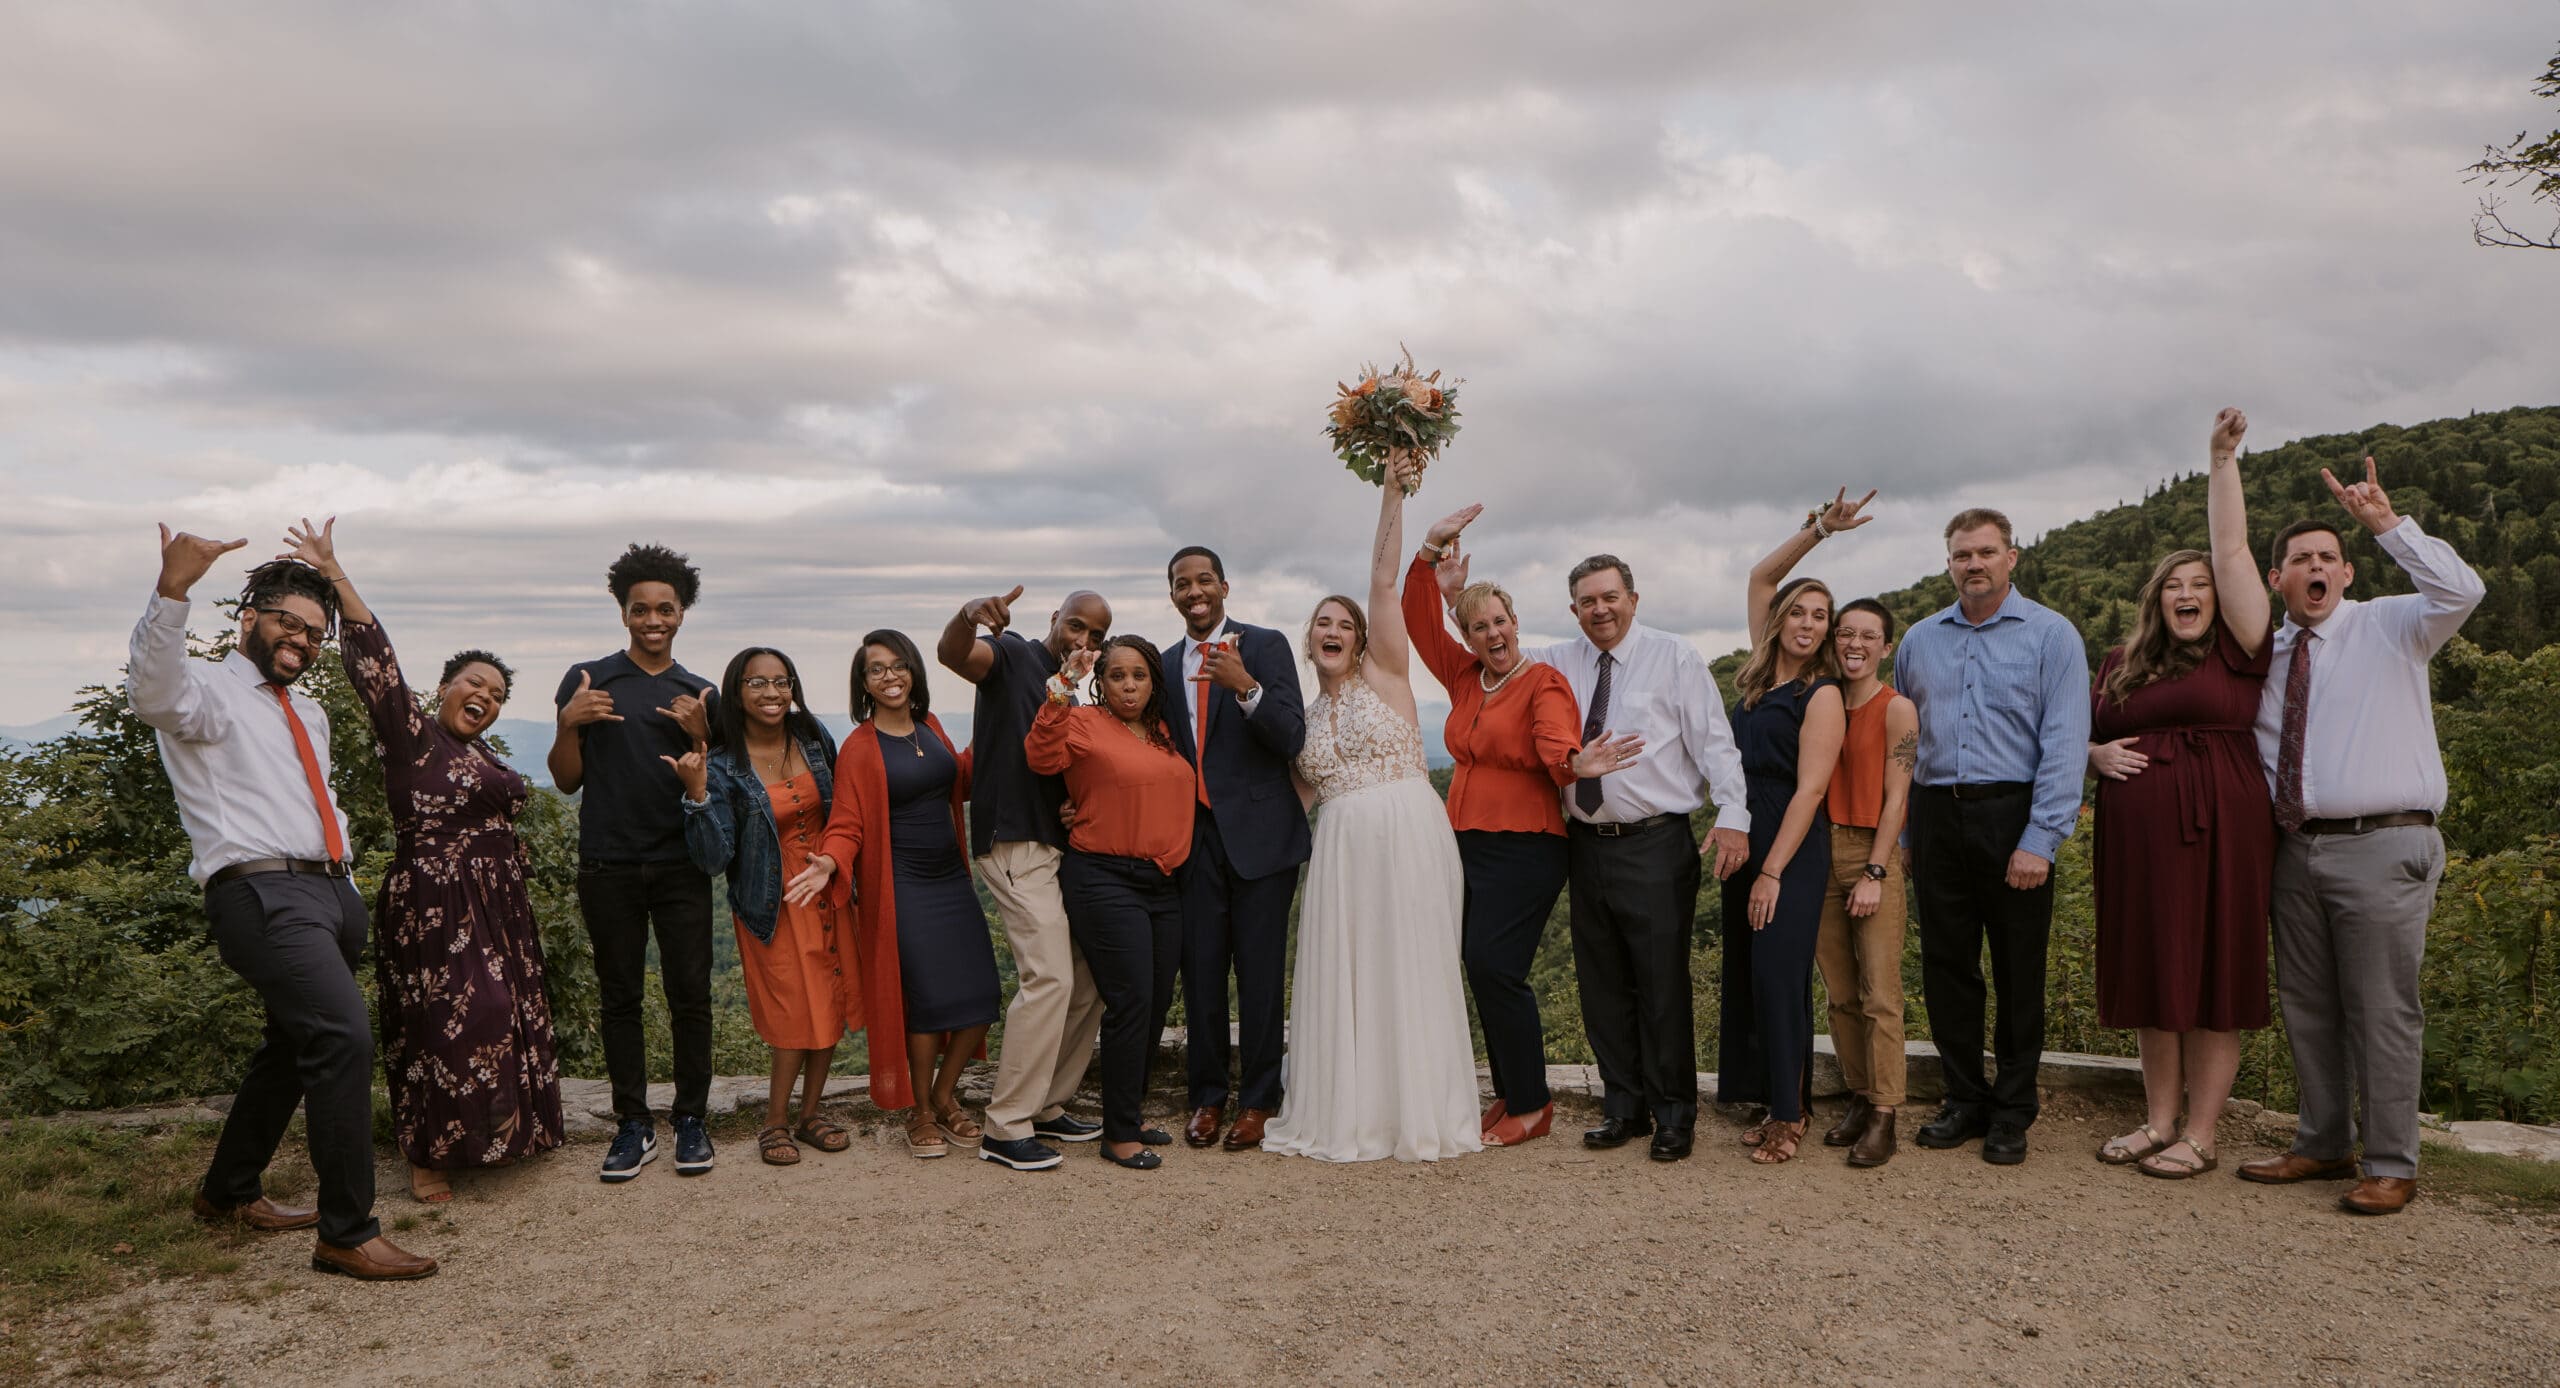 Eloped couples standing with their family whiles celebrating their marriage